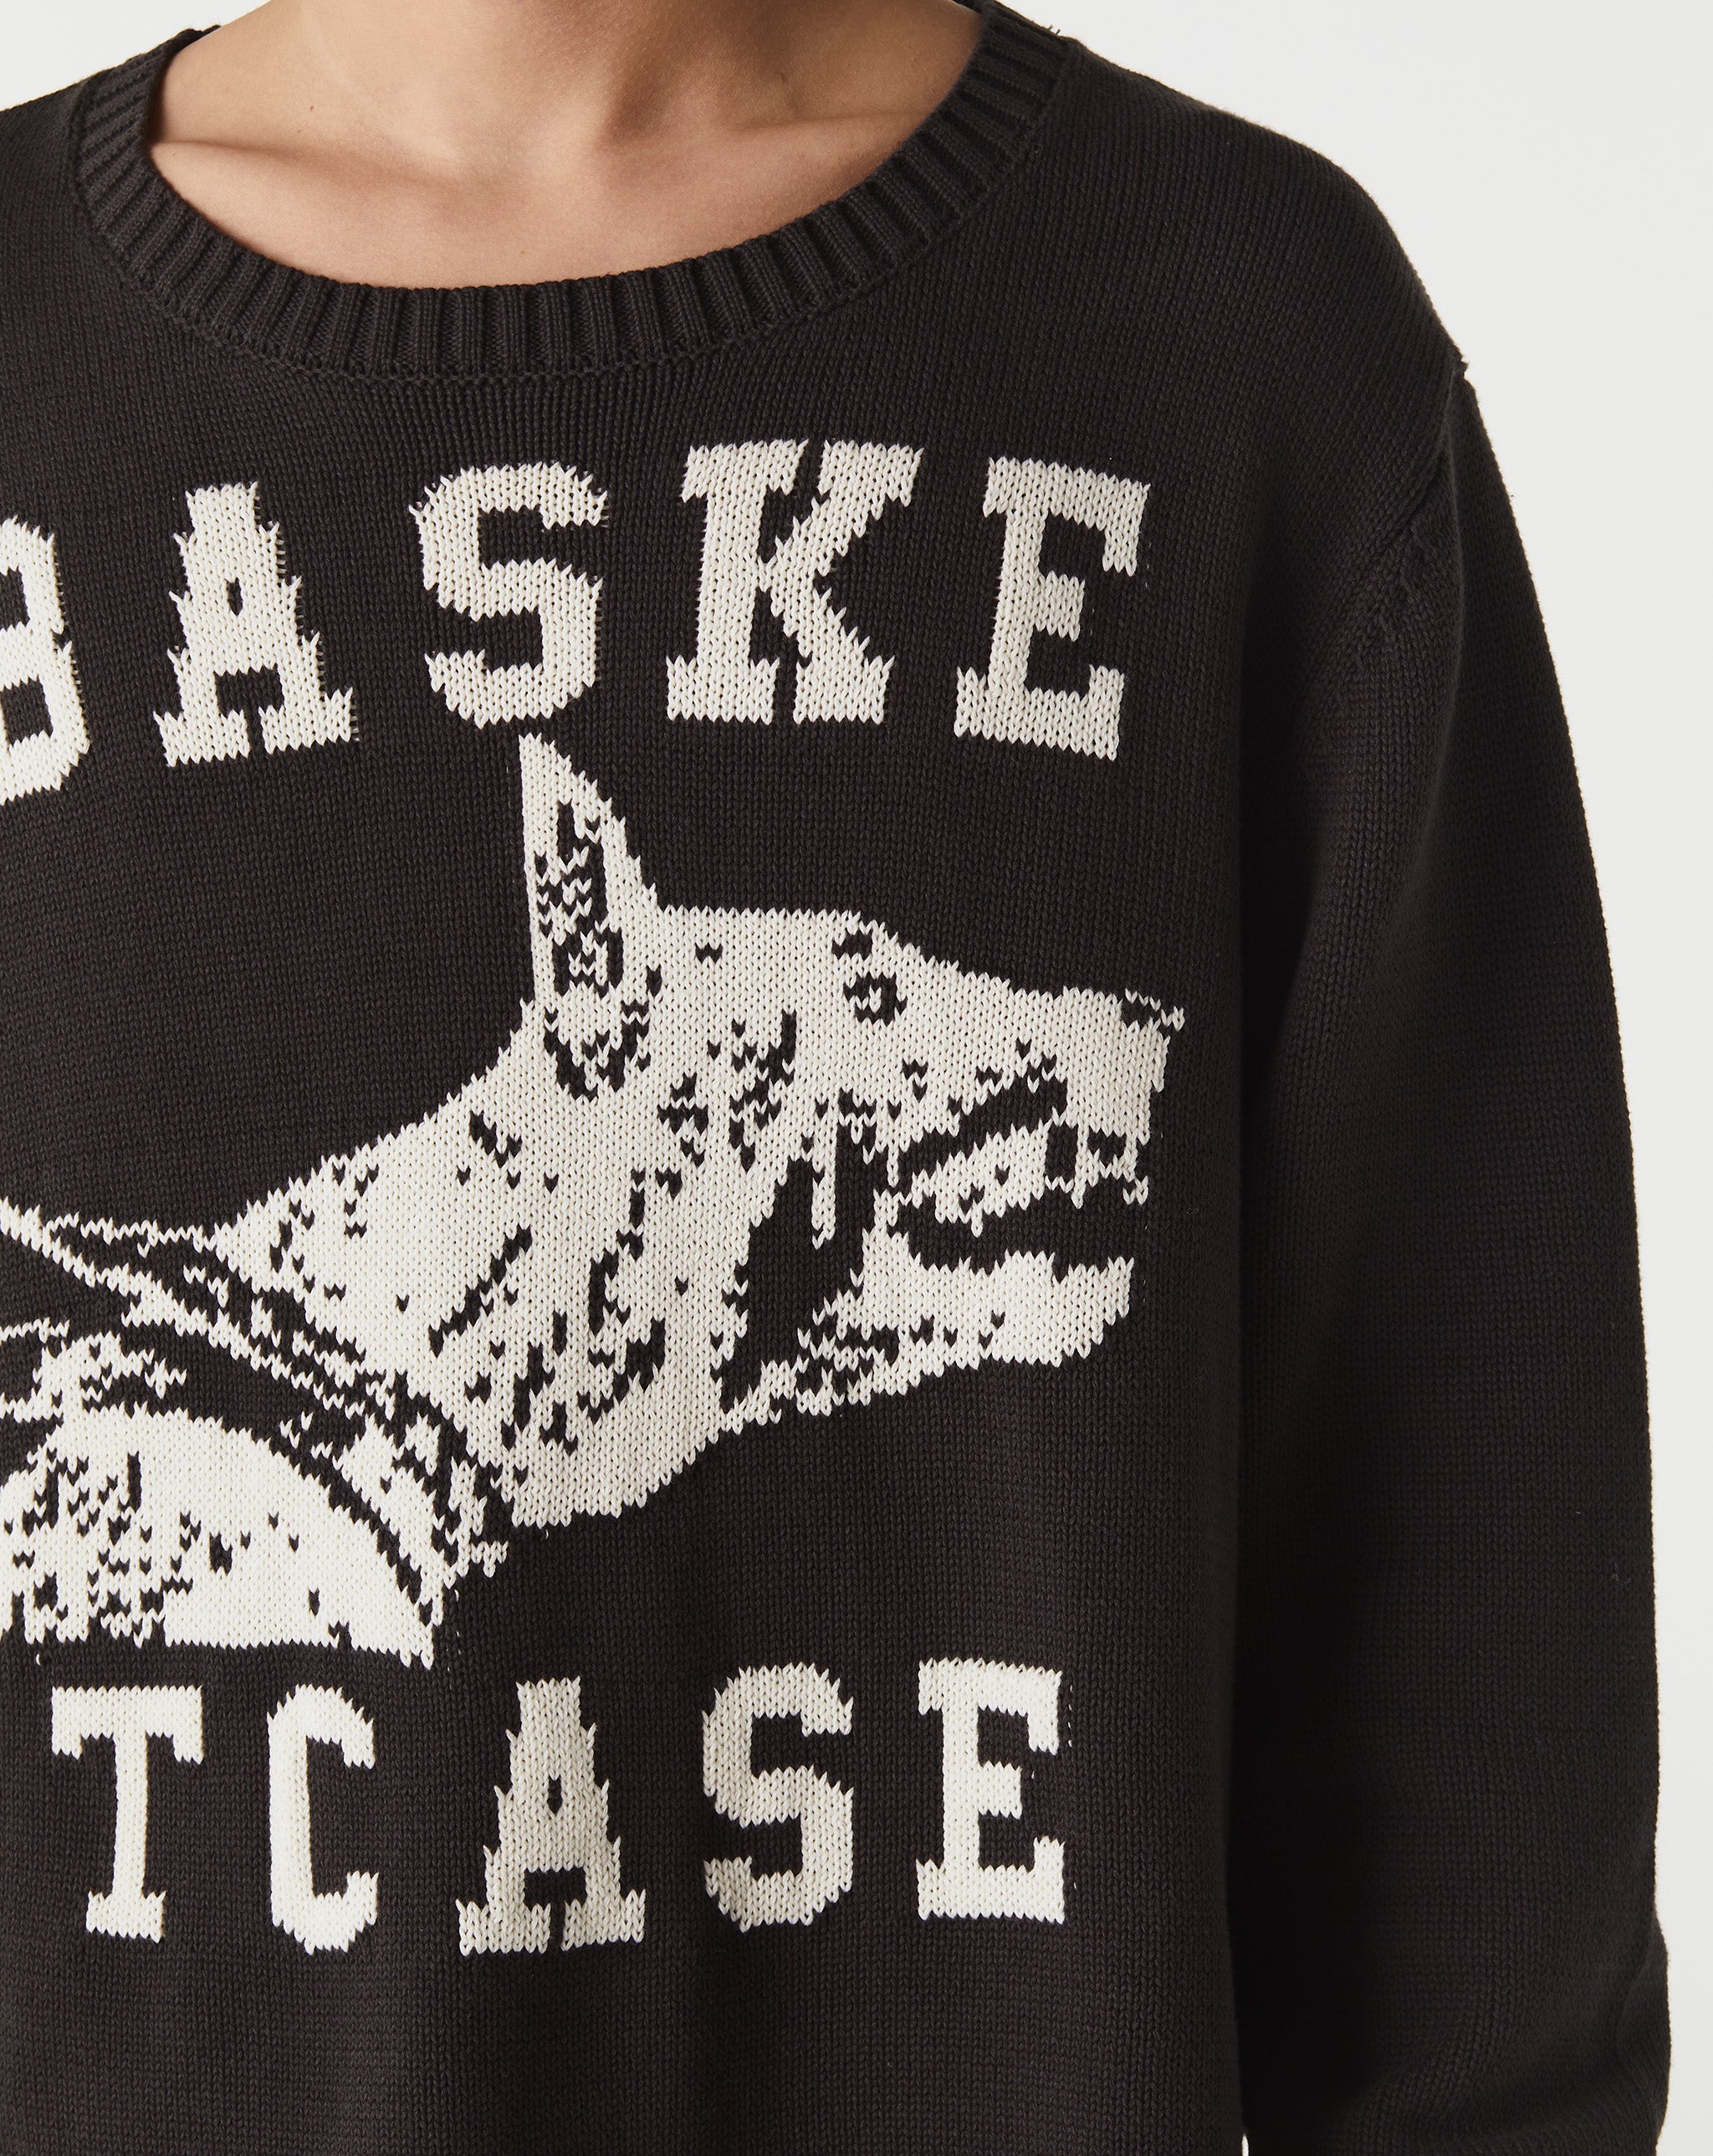 Basketcase Gallery Raw College Knit Sweater  - XHIBITION